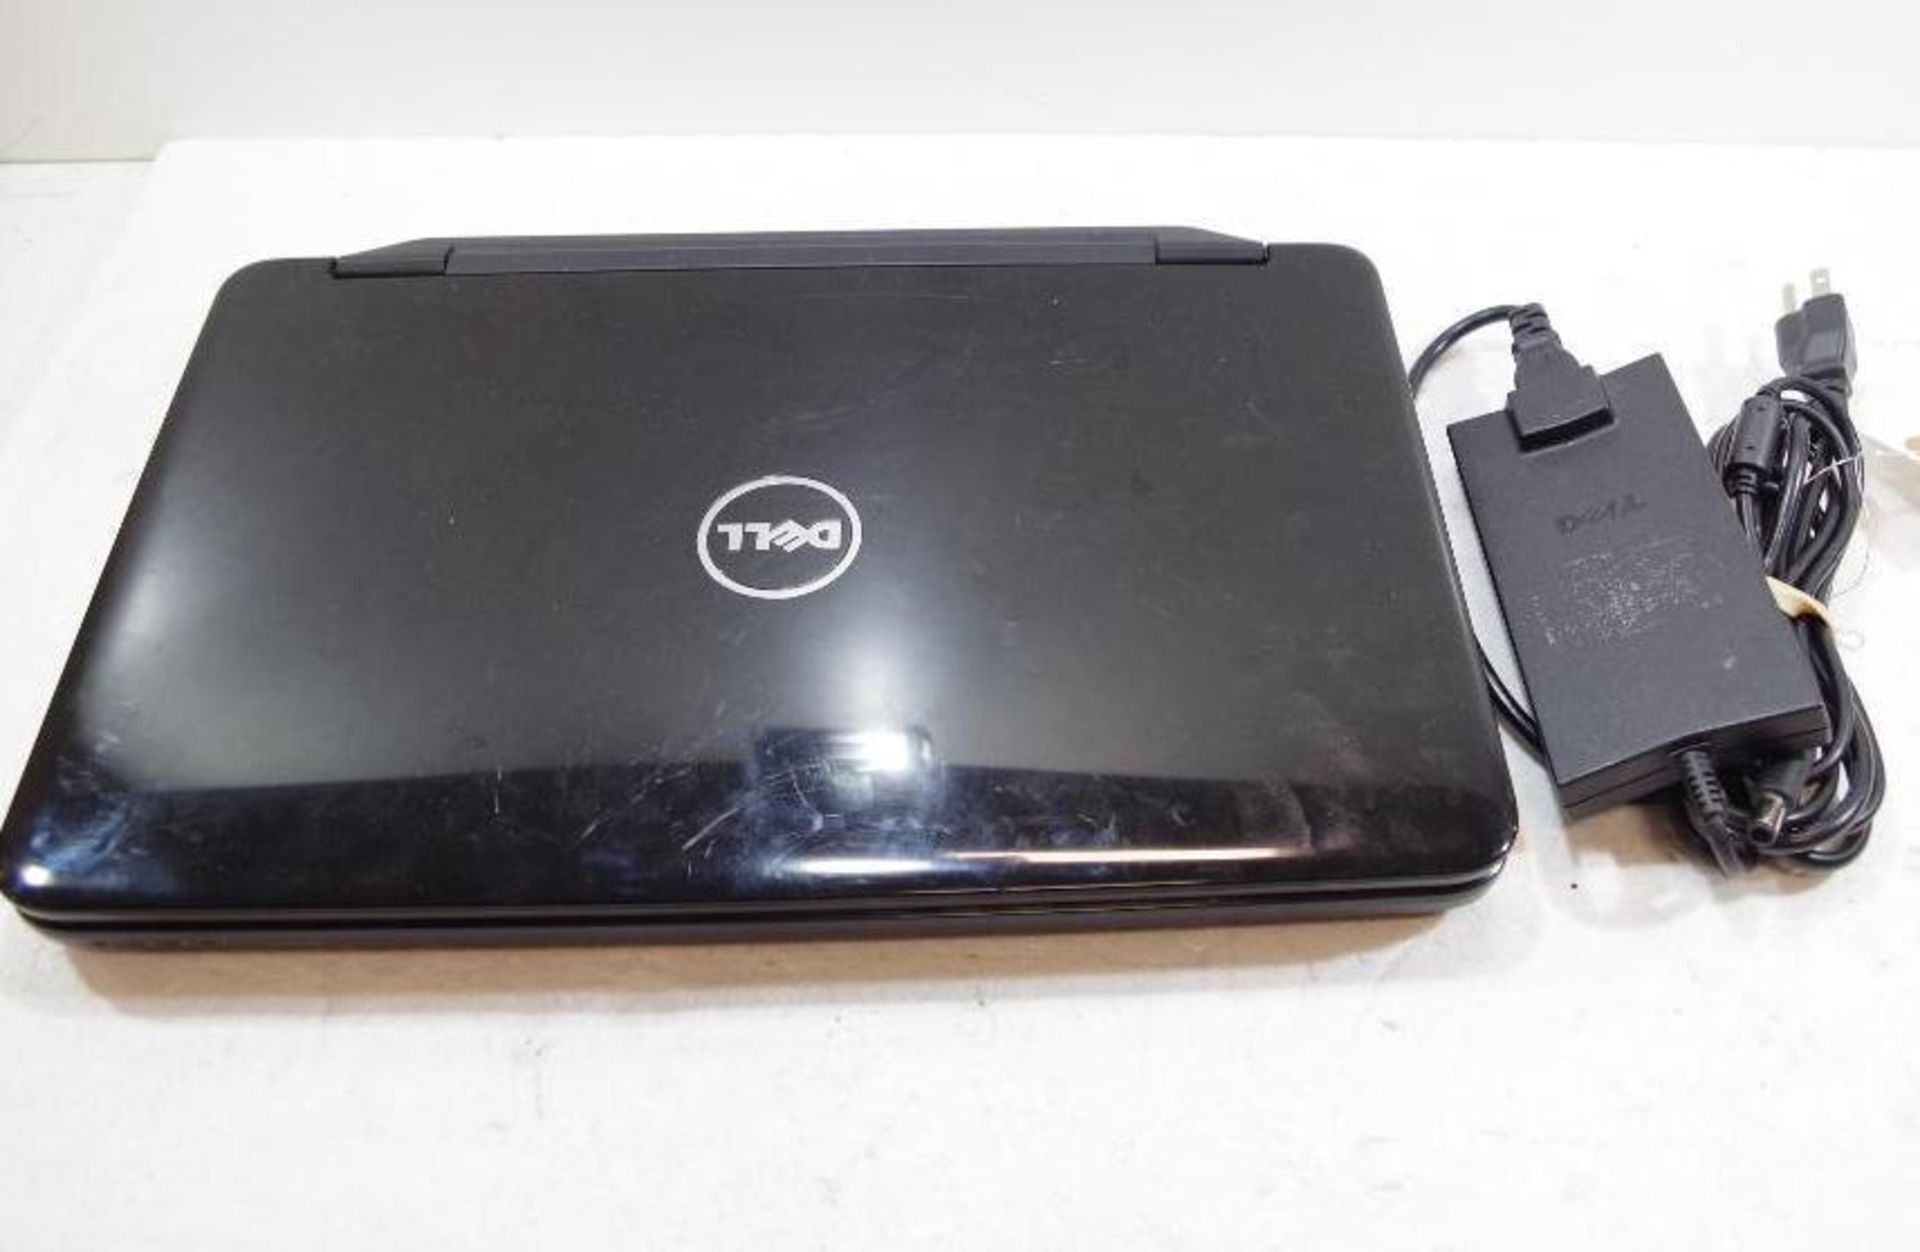 DELL Inspiron Windows 7 Home Premium Laptop w/ Power Supply M/N N5040 - Image 3 of 5